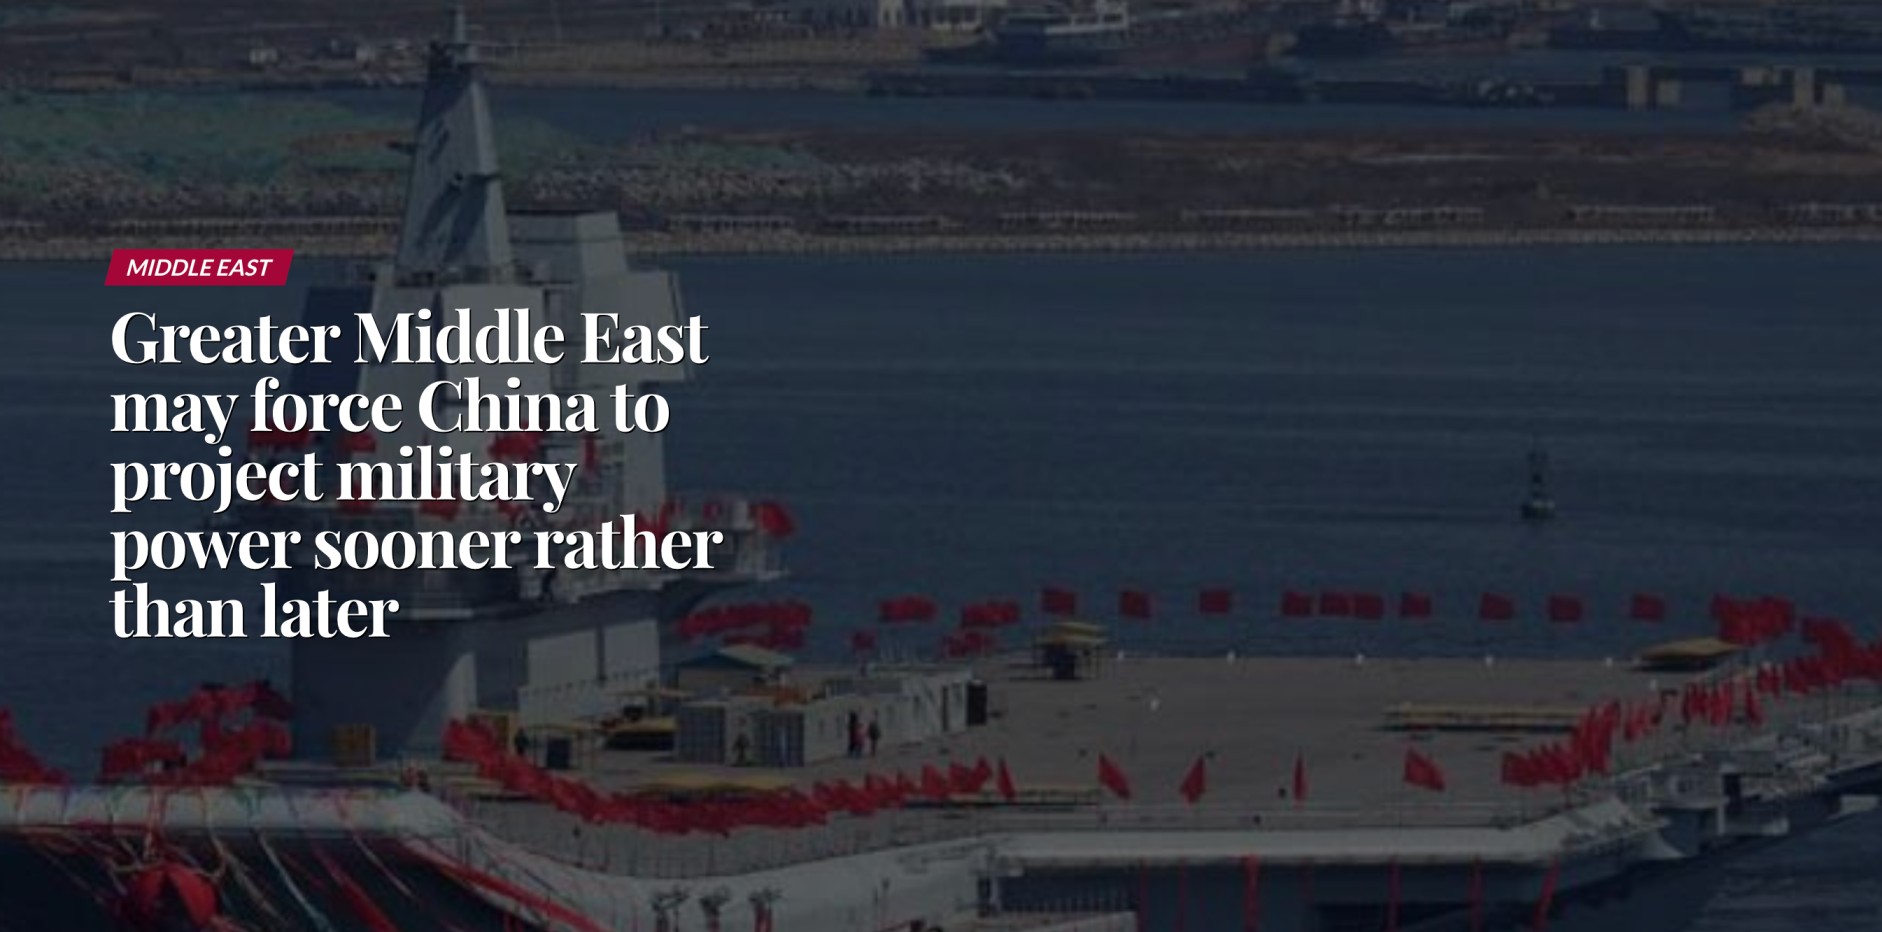 Greater Middle East May Force China to Project Military Power Sooner Rather than Later